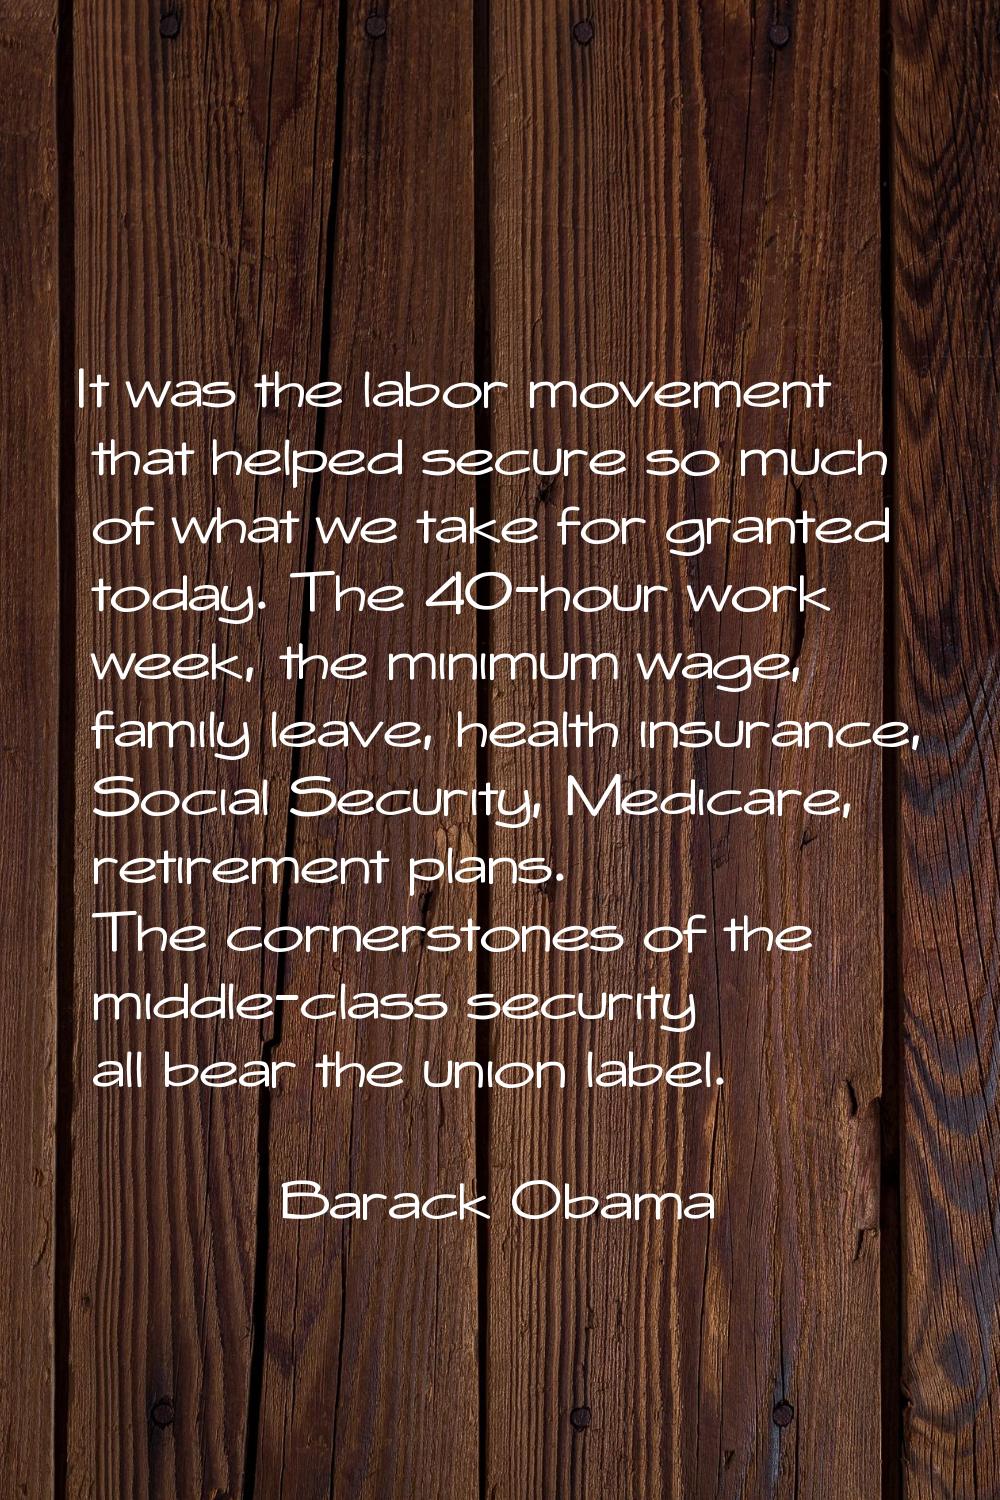 It was the labor movement that helped secure so much of what we take for granted today. The 40-hour